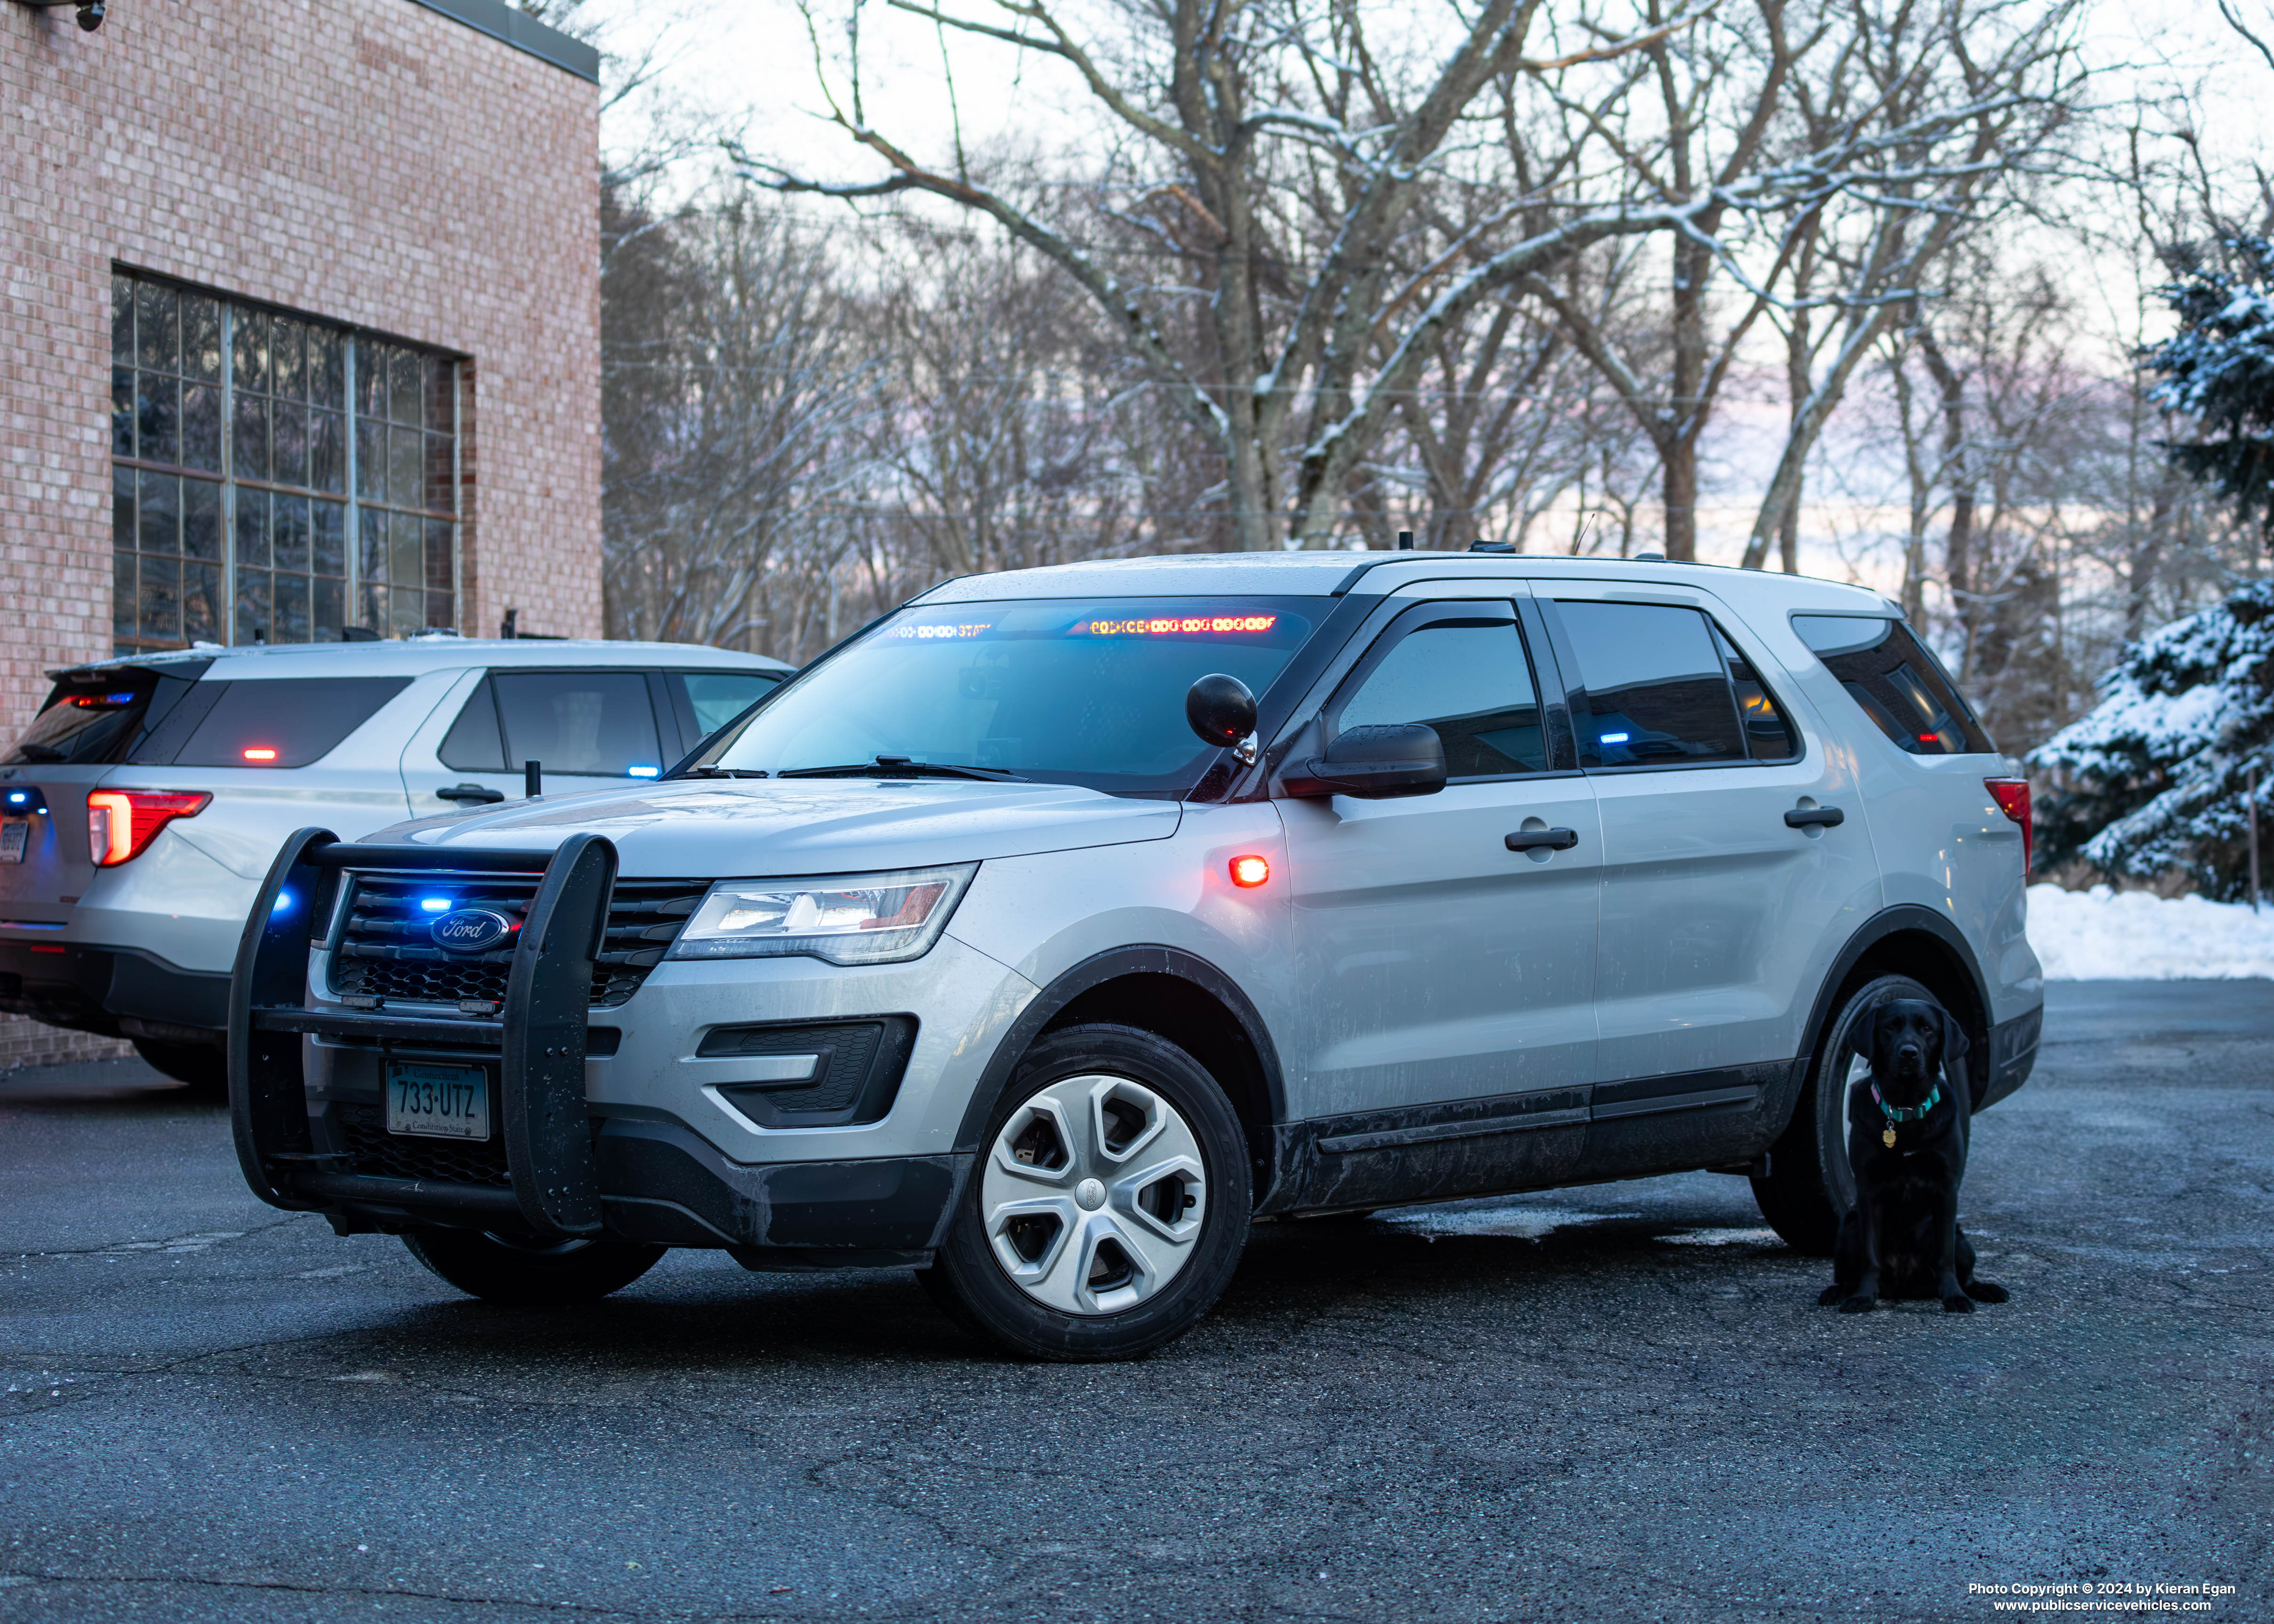 A photo  of Connecticut State Police
            Cruiser 733, a 2019 Ford Police Interceptor Utility             taken by Kieran Egan